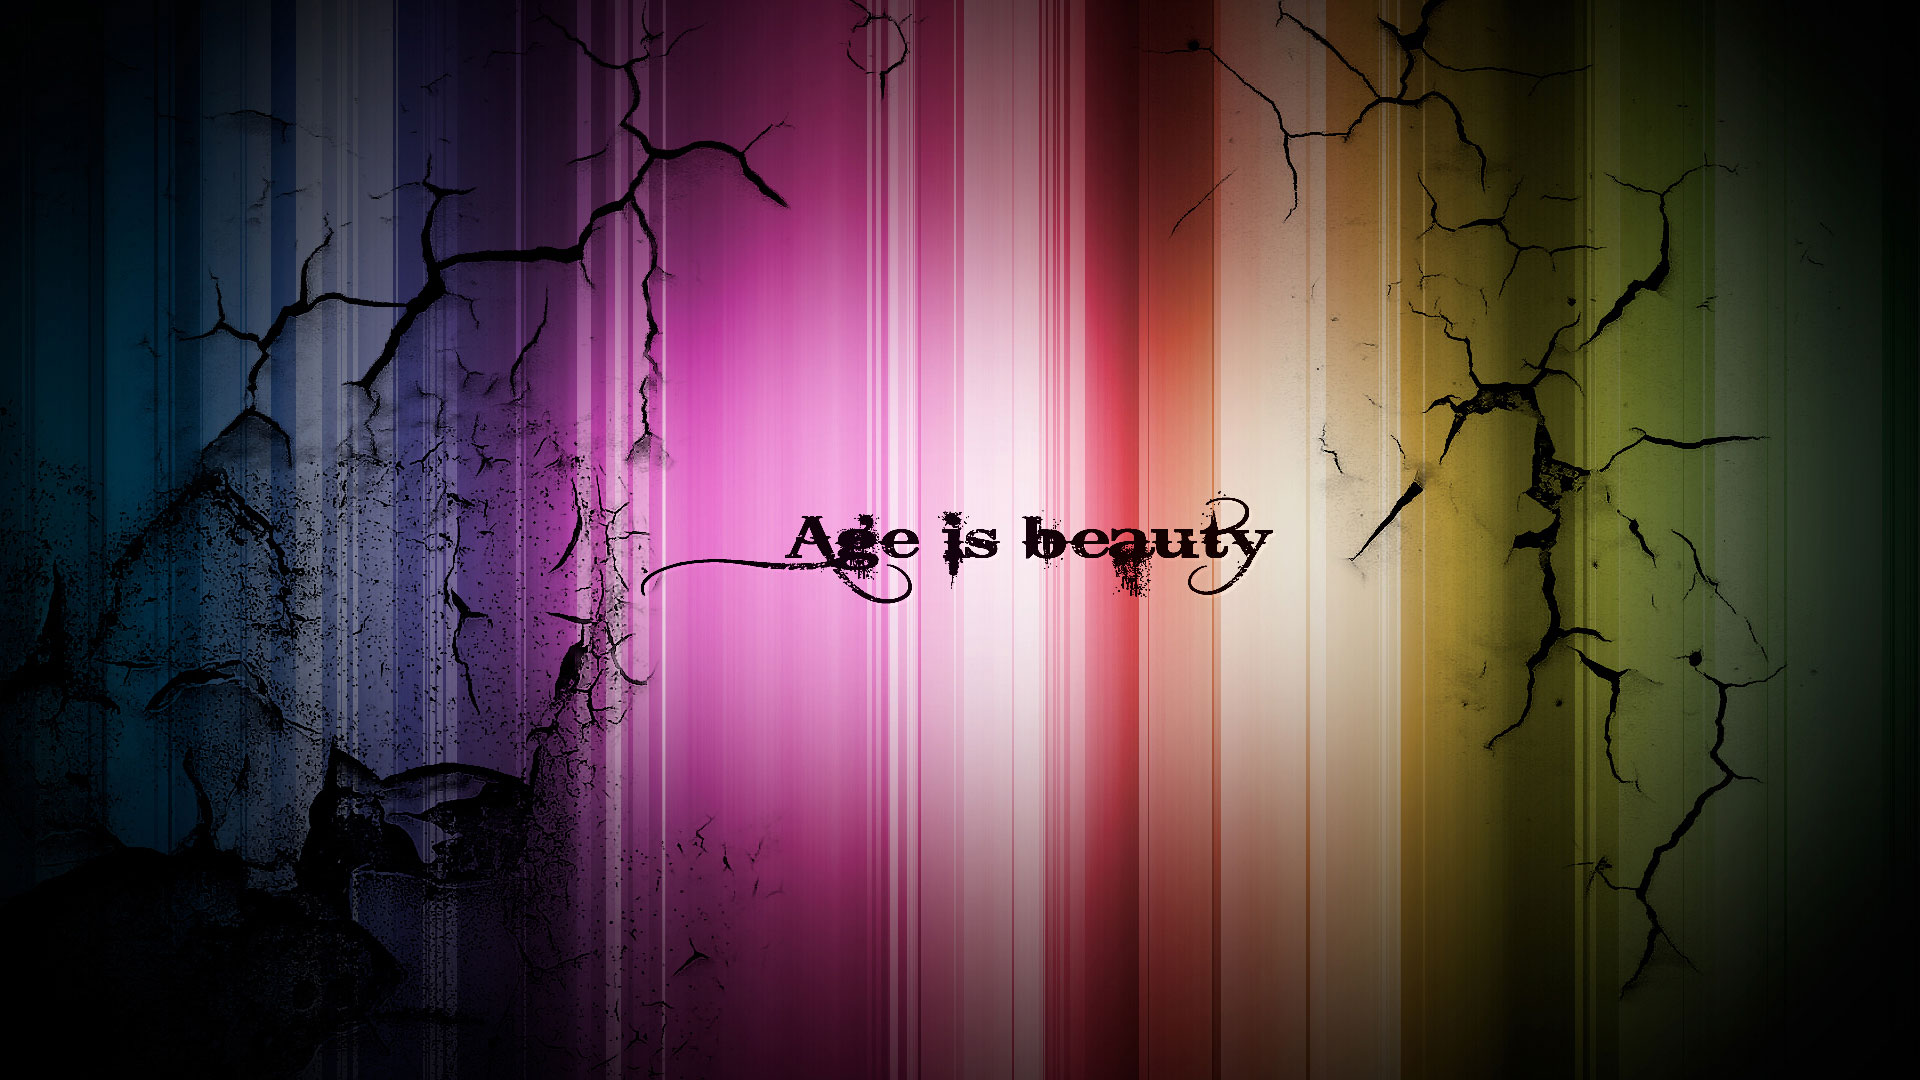 Free Download Age Is Beauty Hd Wallpapers Hd Wallpapers 19x1080 For Your Desktop Mobile Tablet Explore 50 How To Age Wallpaper Dragon Age Phone Wallpaper